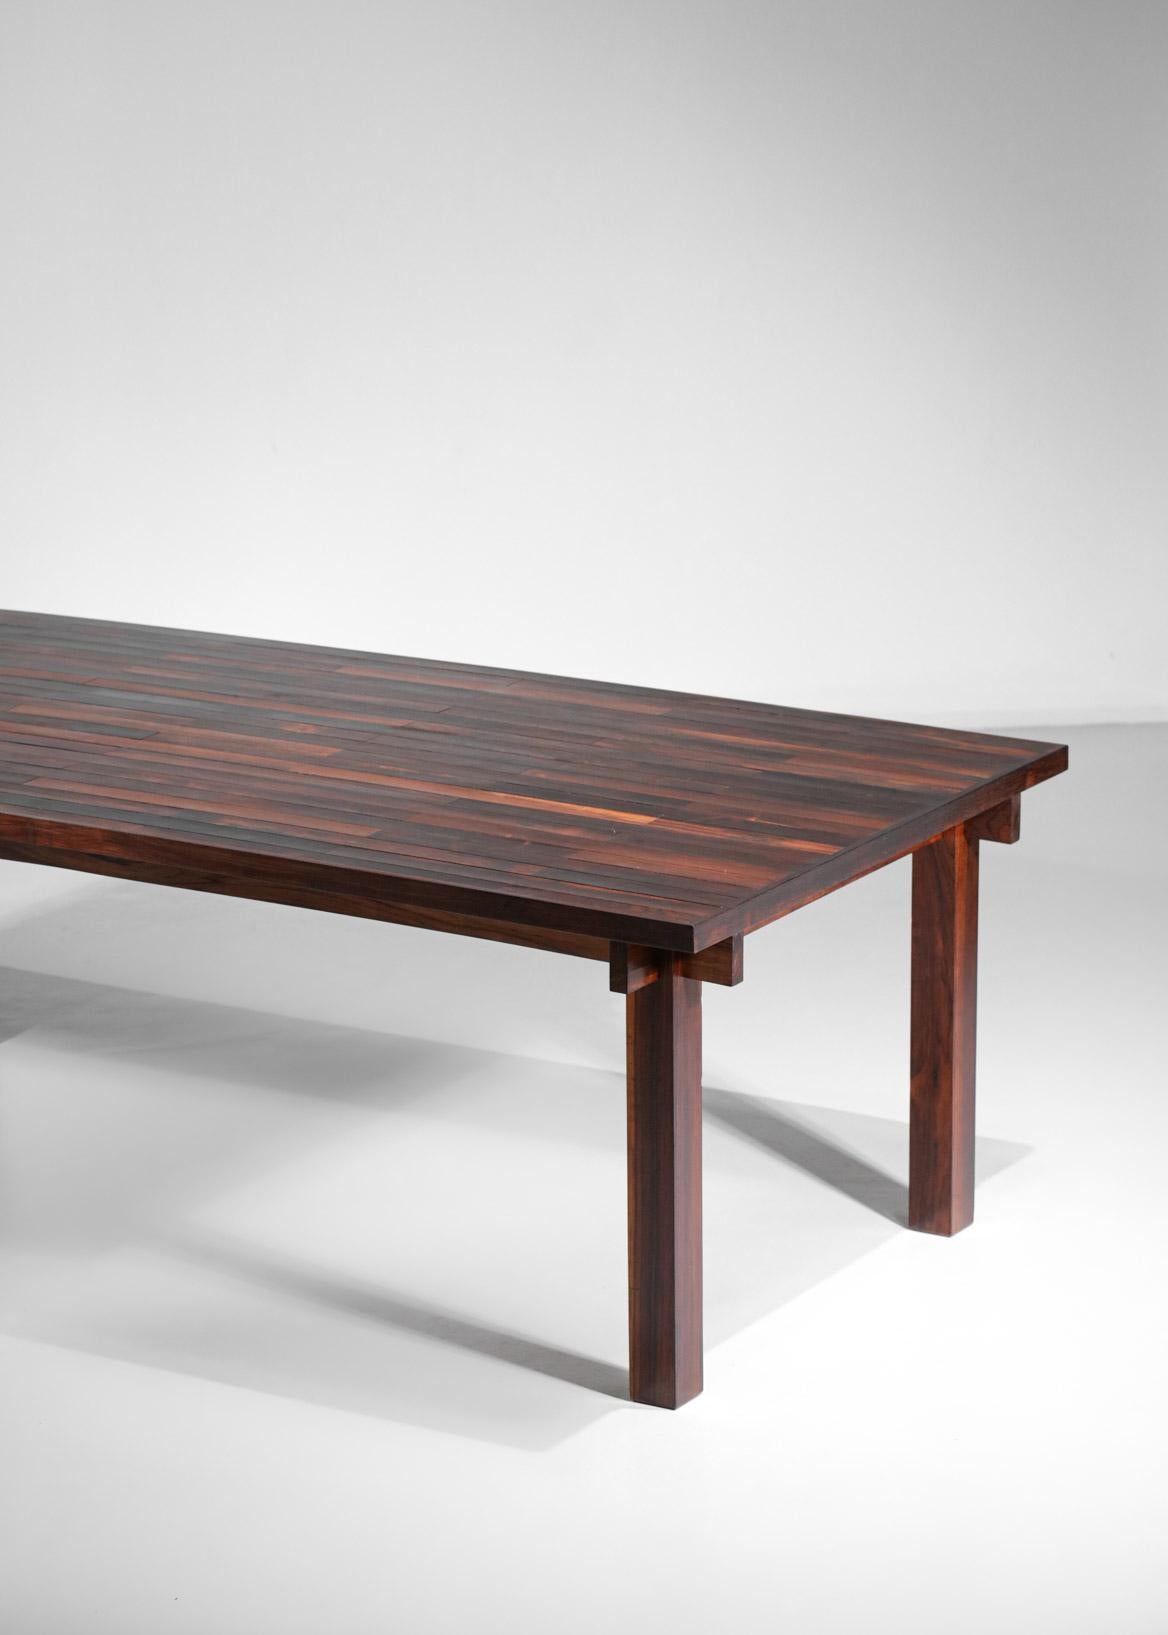 Large Brazilian Dining Table in Solid Wood Style Joachim Tenreiro, 1960's For Sale 10